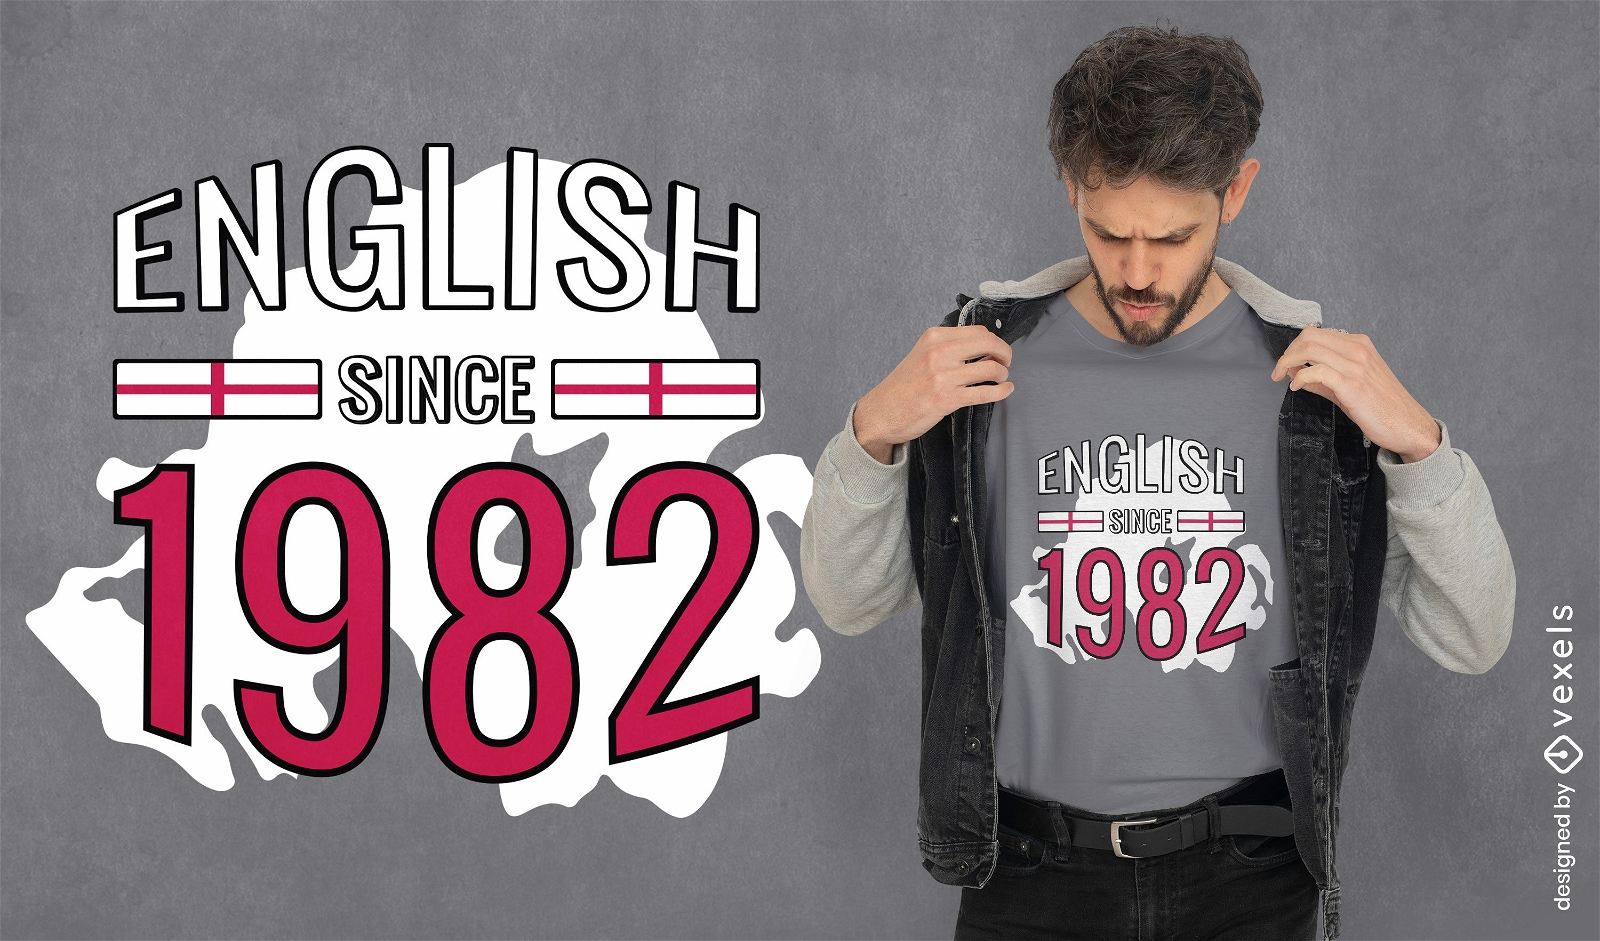 English since 1982 quote t-shirt design